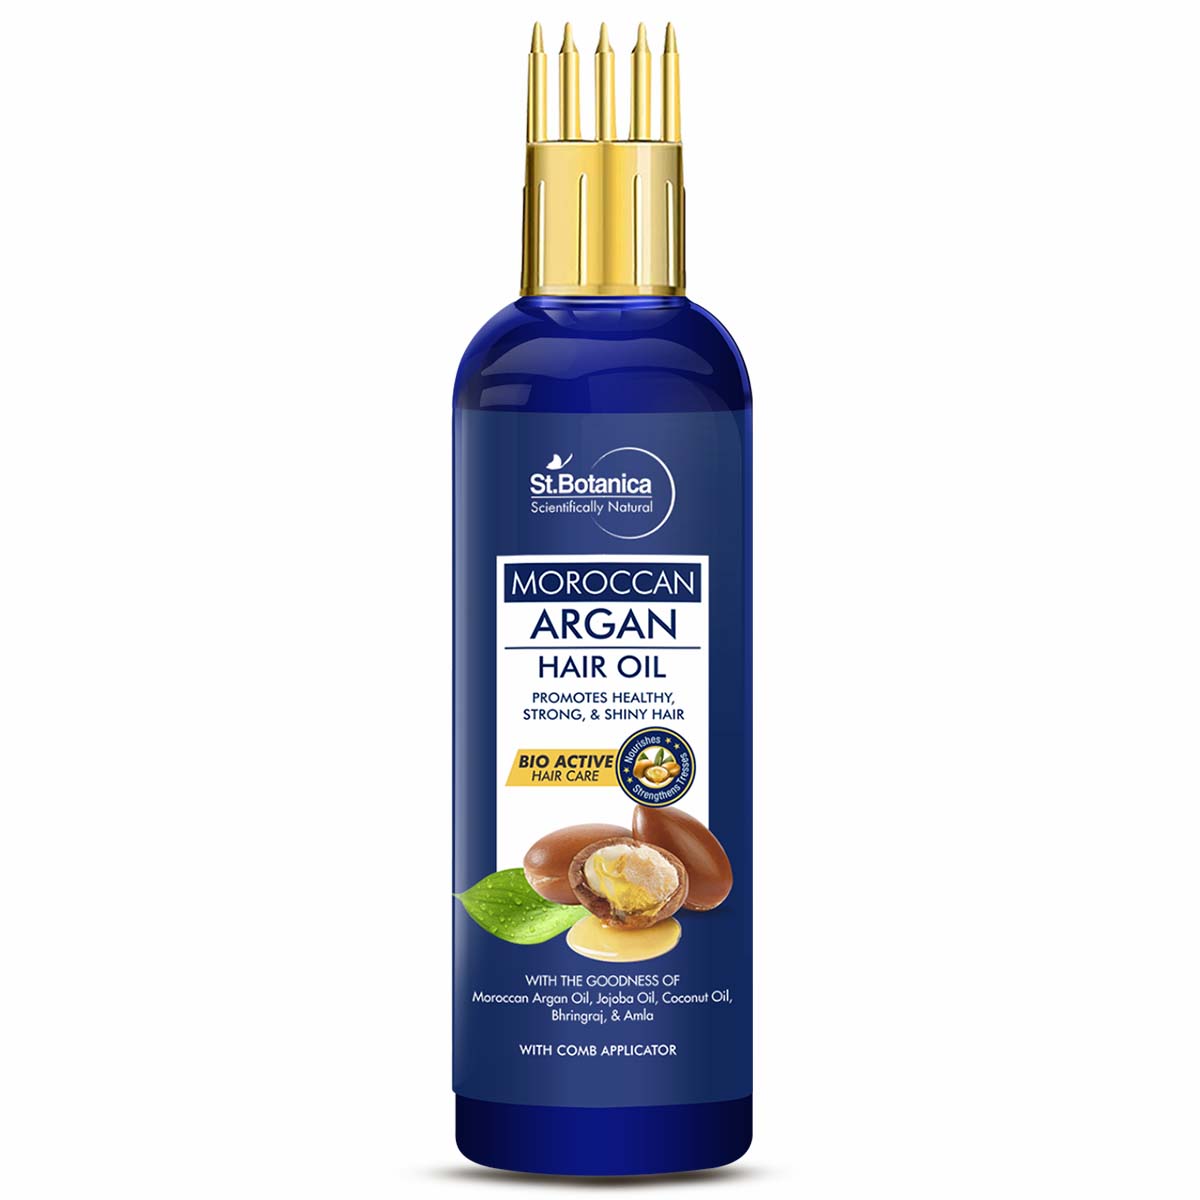 St.Botanica Moroccan Argan Hair Oil With Comb Applicator 200ml - With Goodness Of 19 Oils - Promotes Healthy, Long, Strong & Shiny Hair